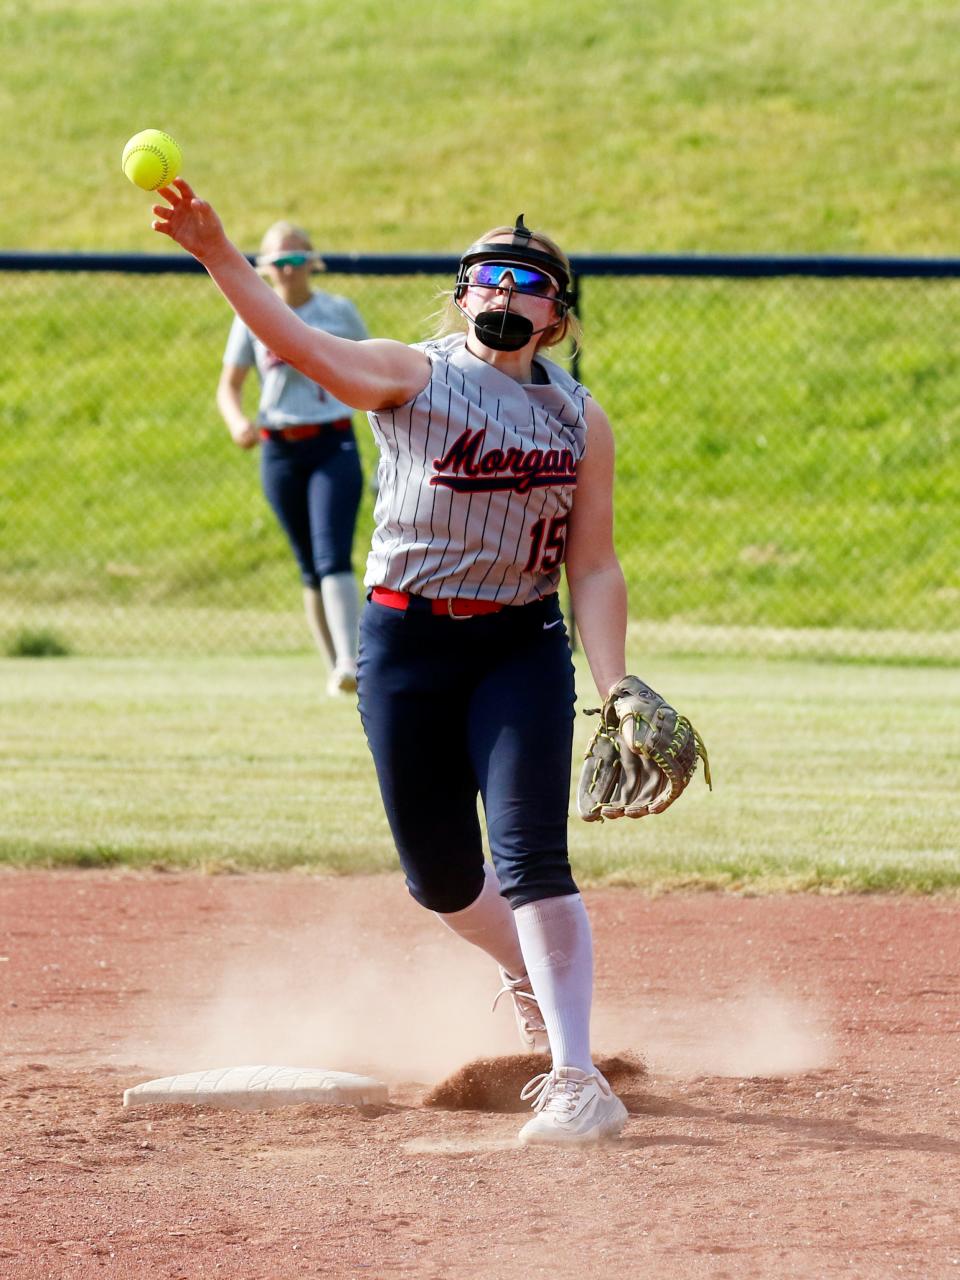 Chloe Baker throws to first base during Morgan's 15-5 win against visiting Coshocton on Monday in McConnelsville.